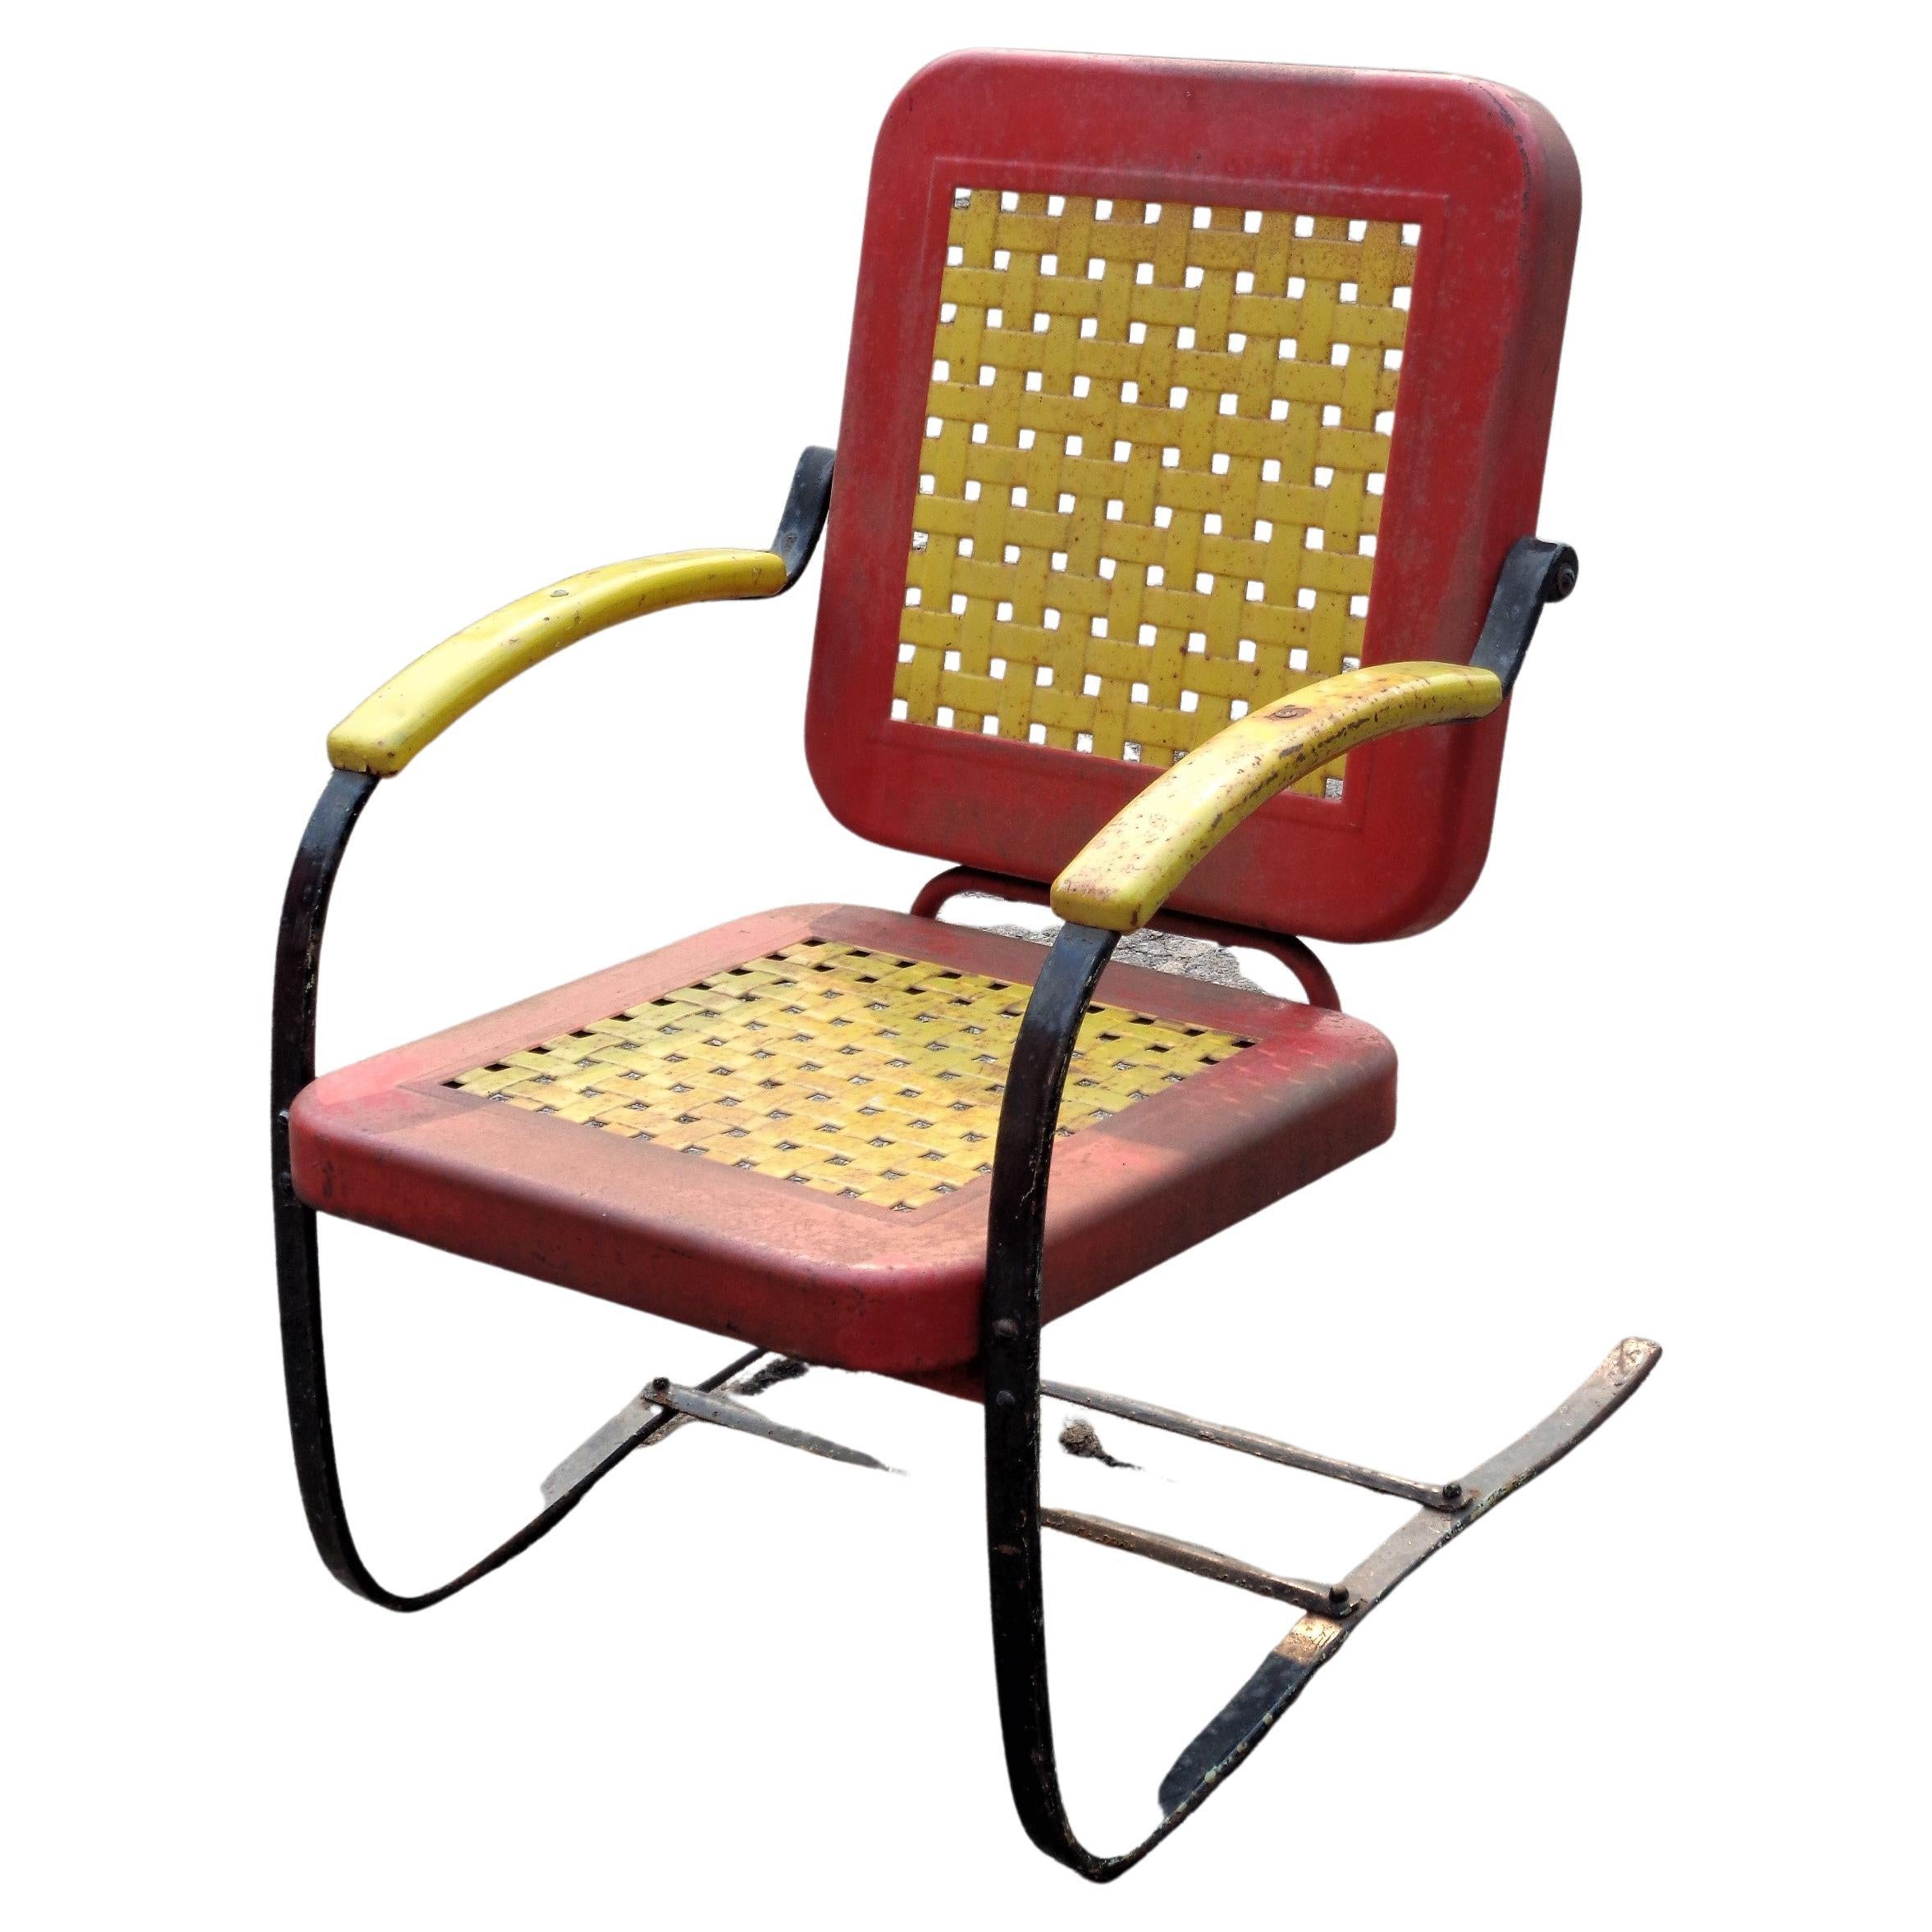 American Art Deco iron cantilever base floating rocking chair w/ beautifully shaped woven basket design seat and back rest in original glowing yellow, red and black factory enamel painted surface by the Bunting Glider Co. / stamped signed in metal